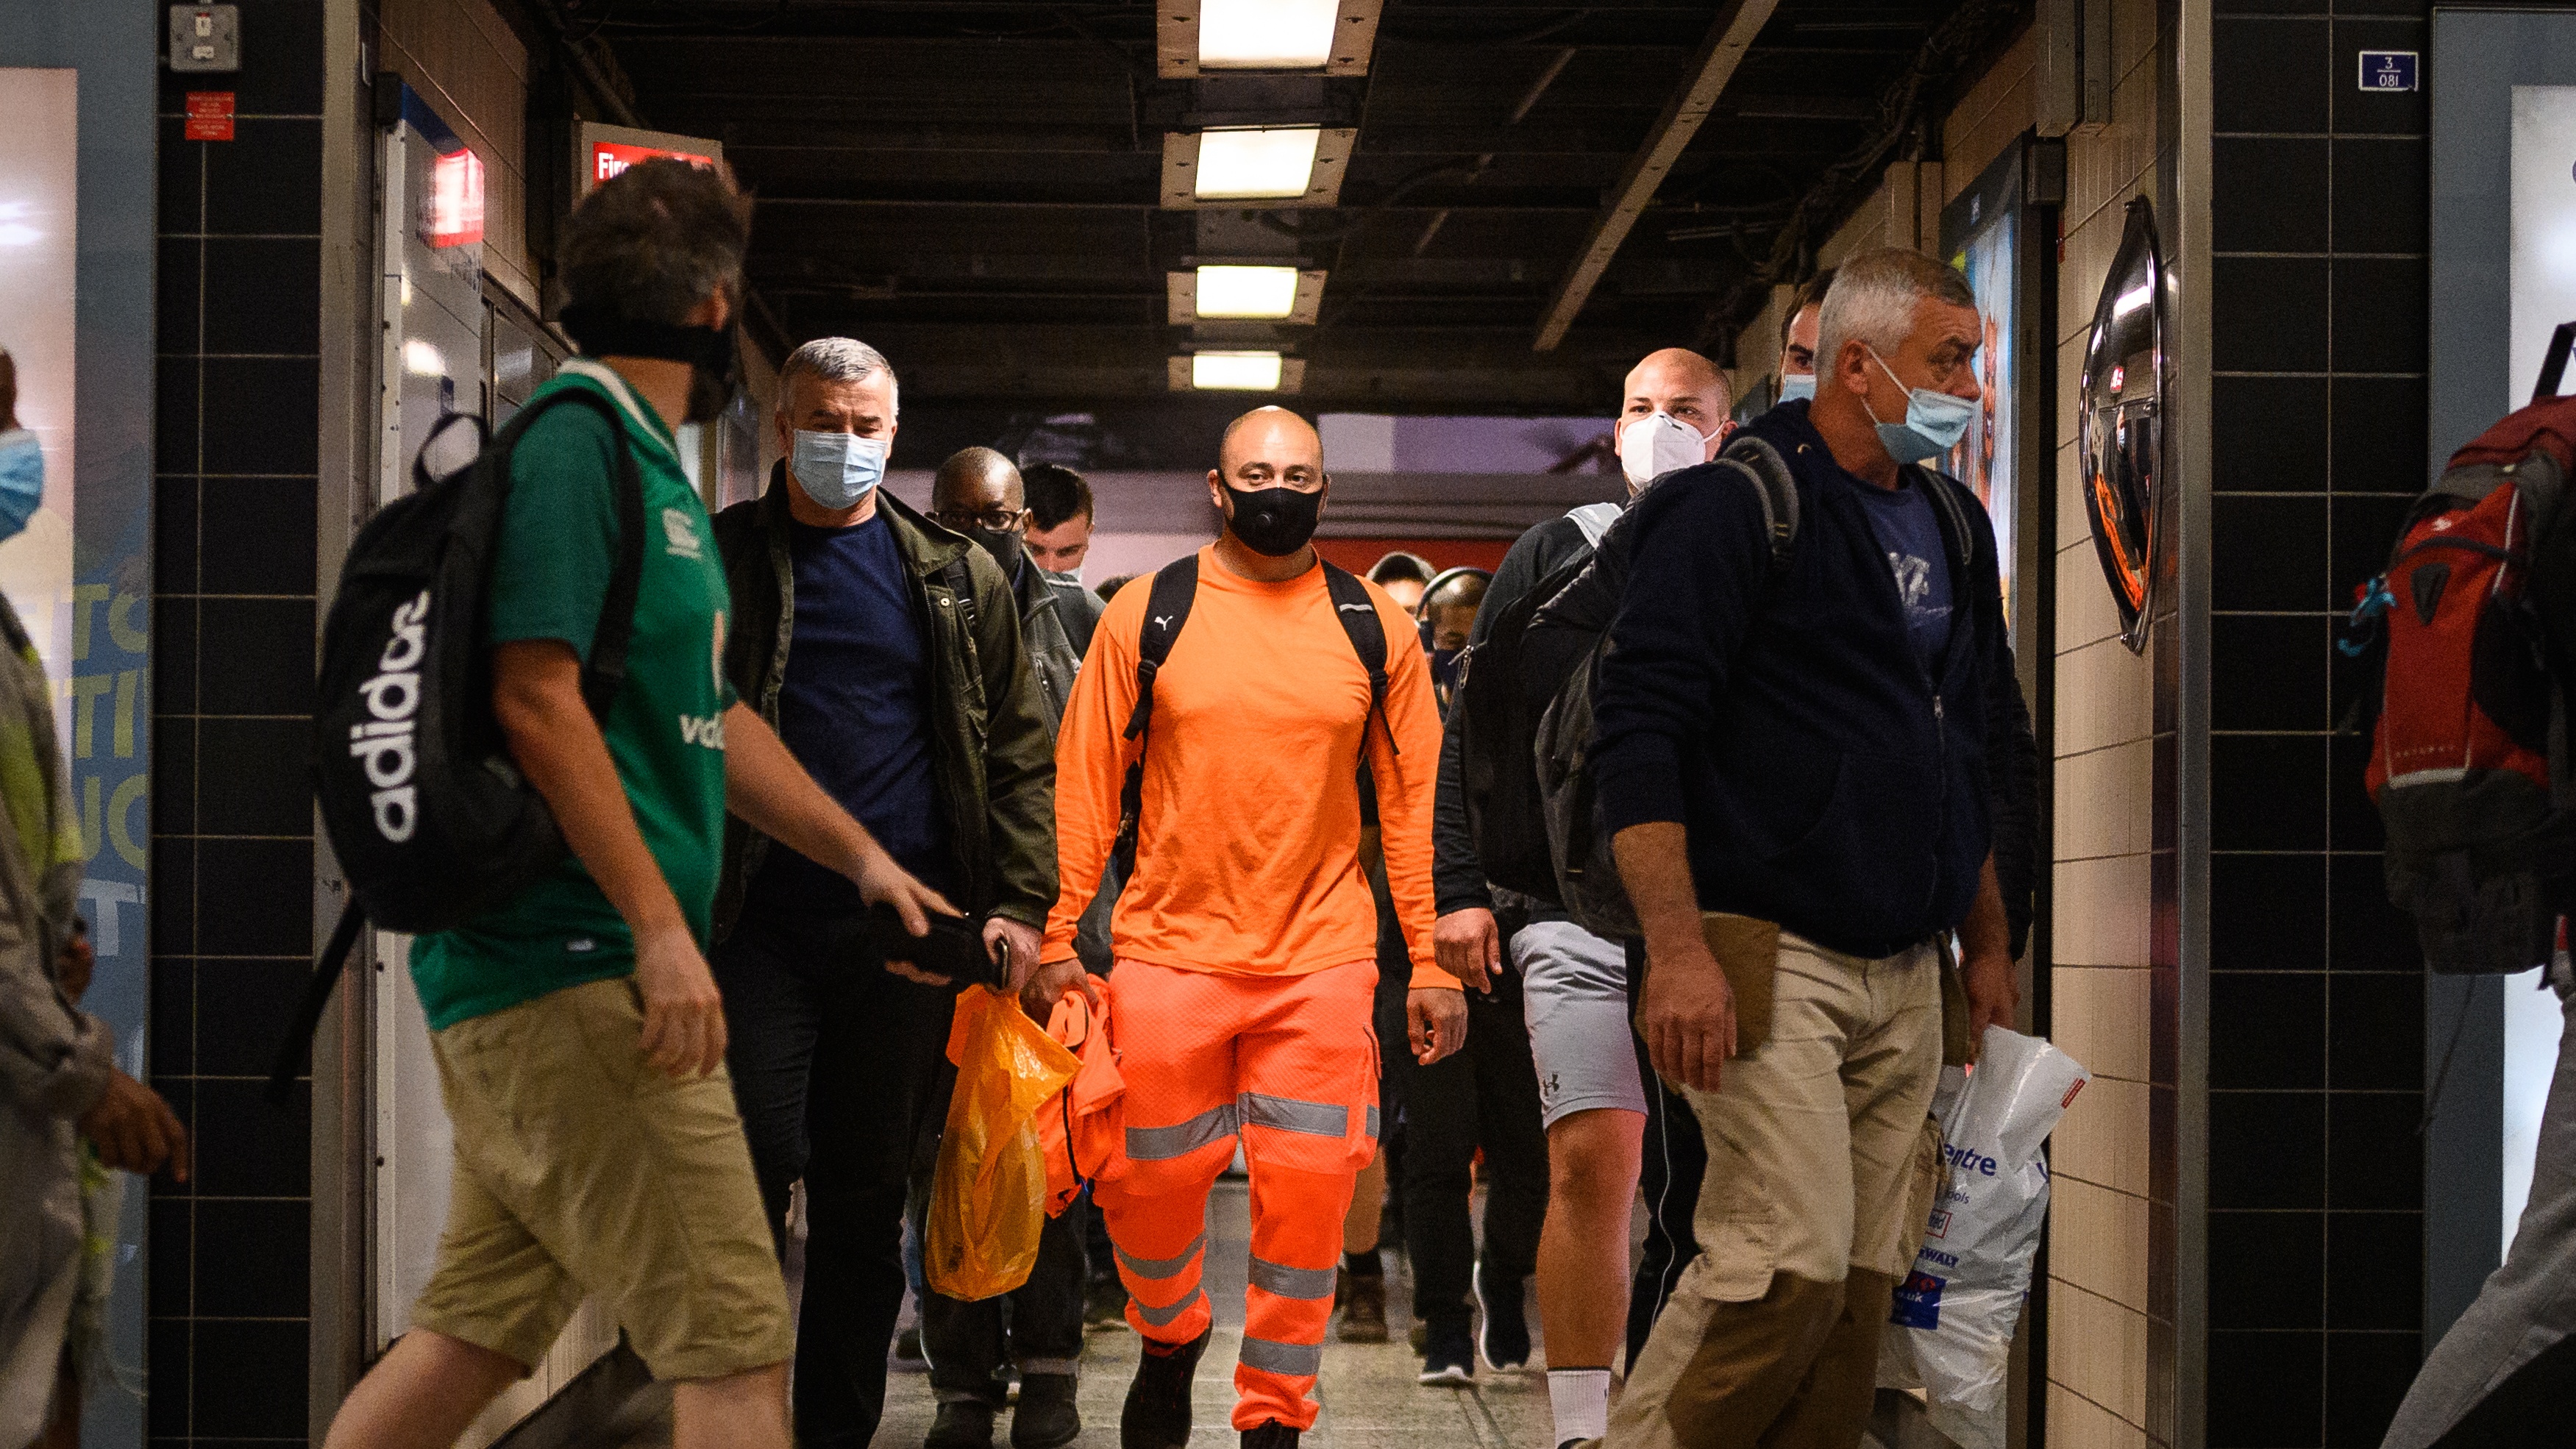 Commuters wear face masks as they pass through Vauxhall underground station, London.